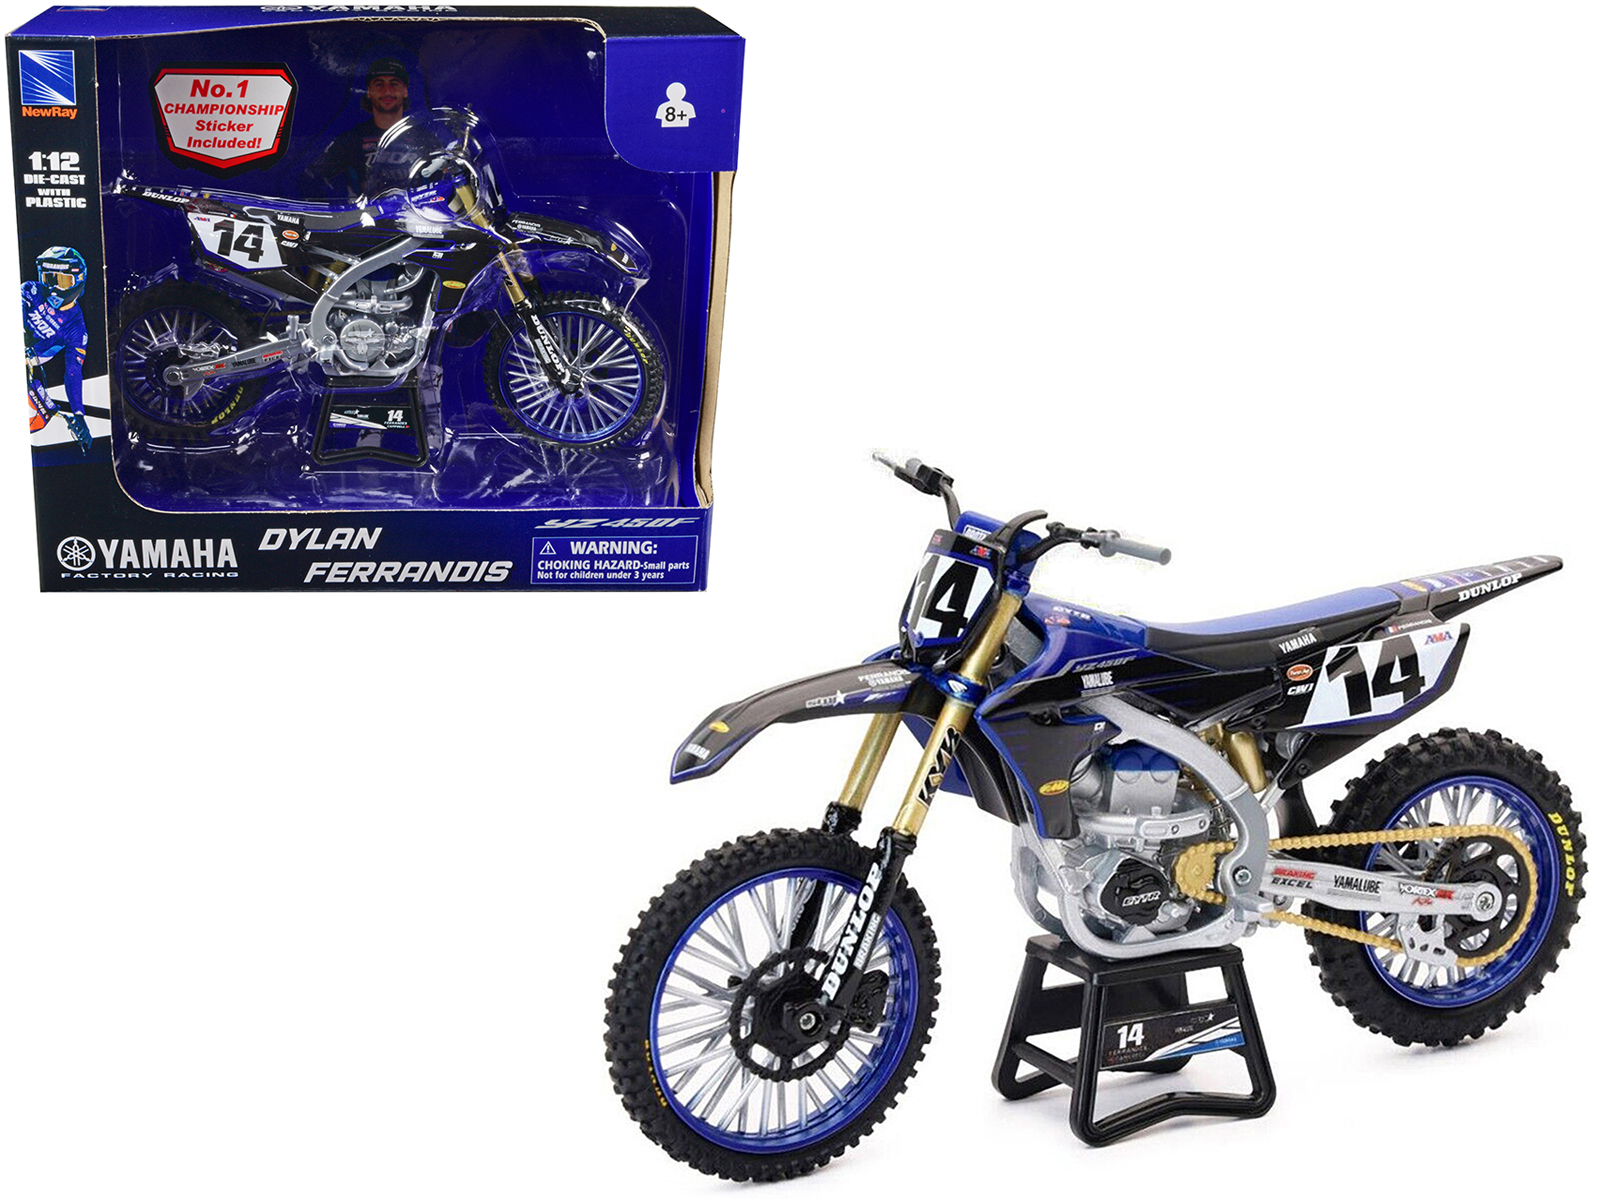 New Ray Yamaha YZ450F Championship Edition Motorcycle #14 Dylan Ferrandis "Yamaha Factory Racing" 1/12 Diecast Model by New Ray